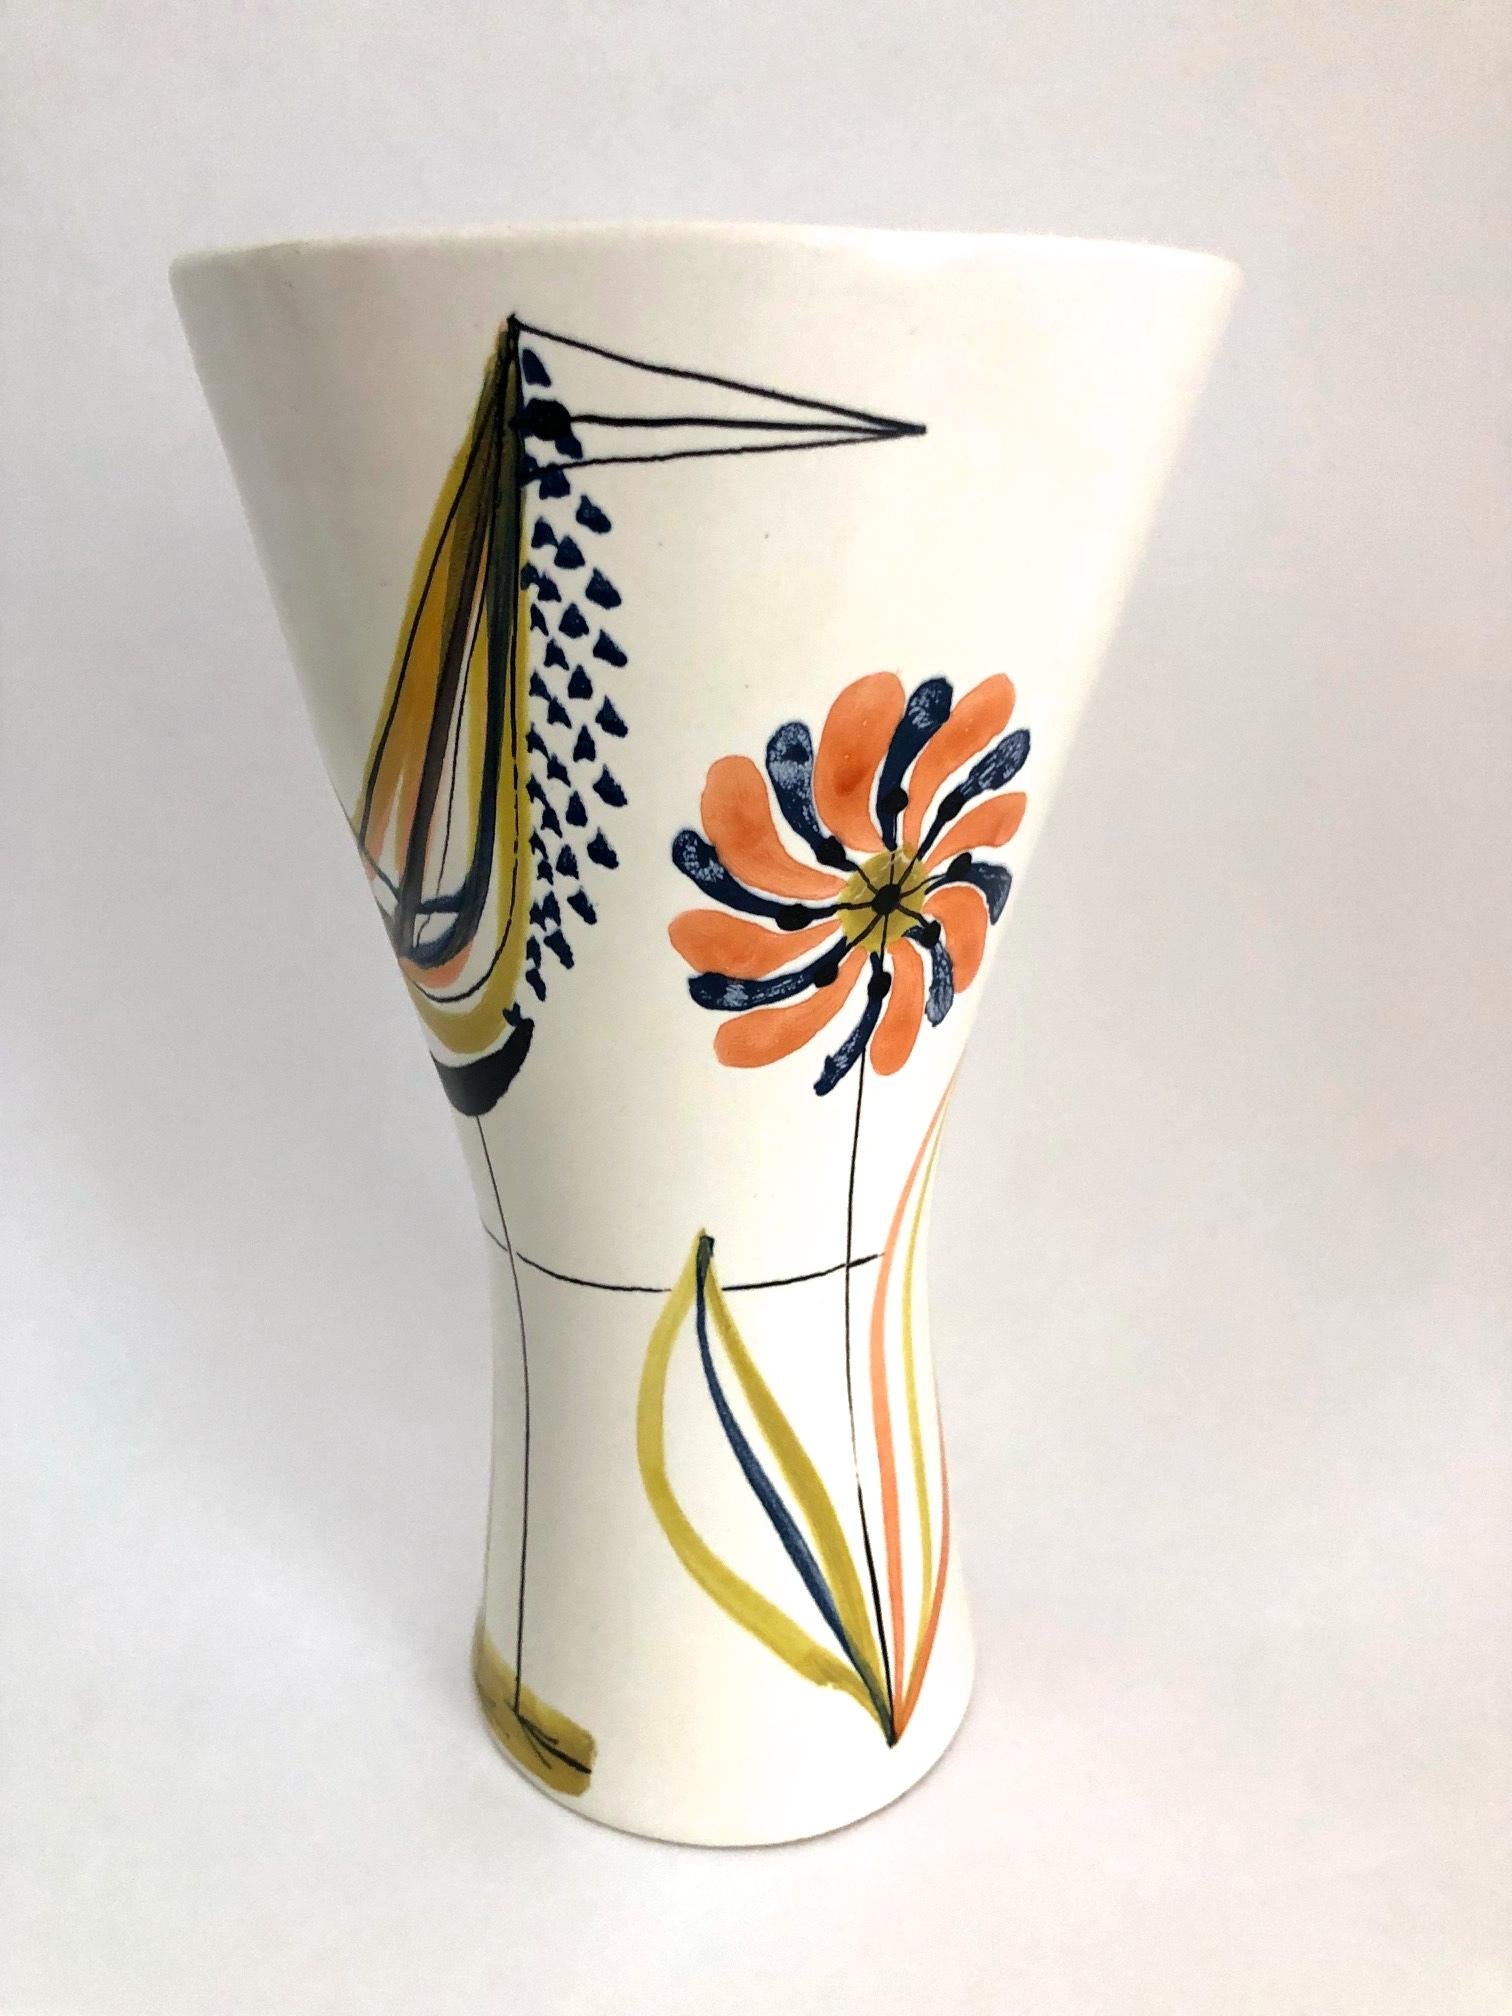 Unusual vase with stylised bird and flower, signed Capron Vallauris on back.
   